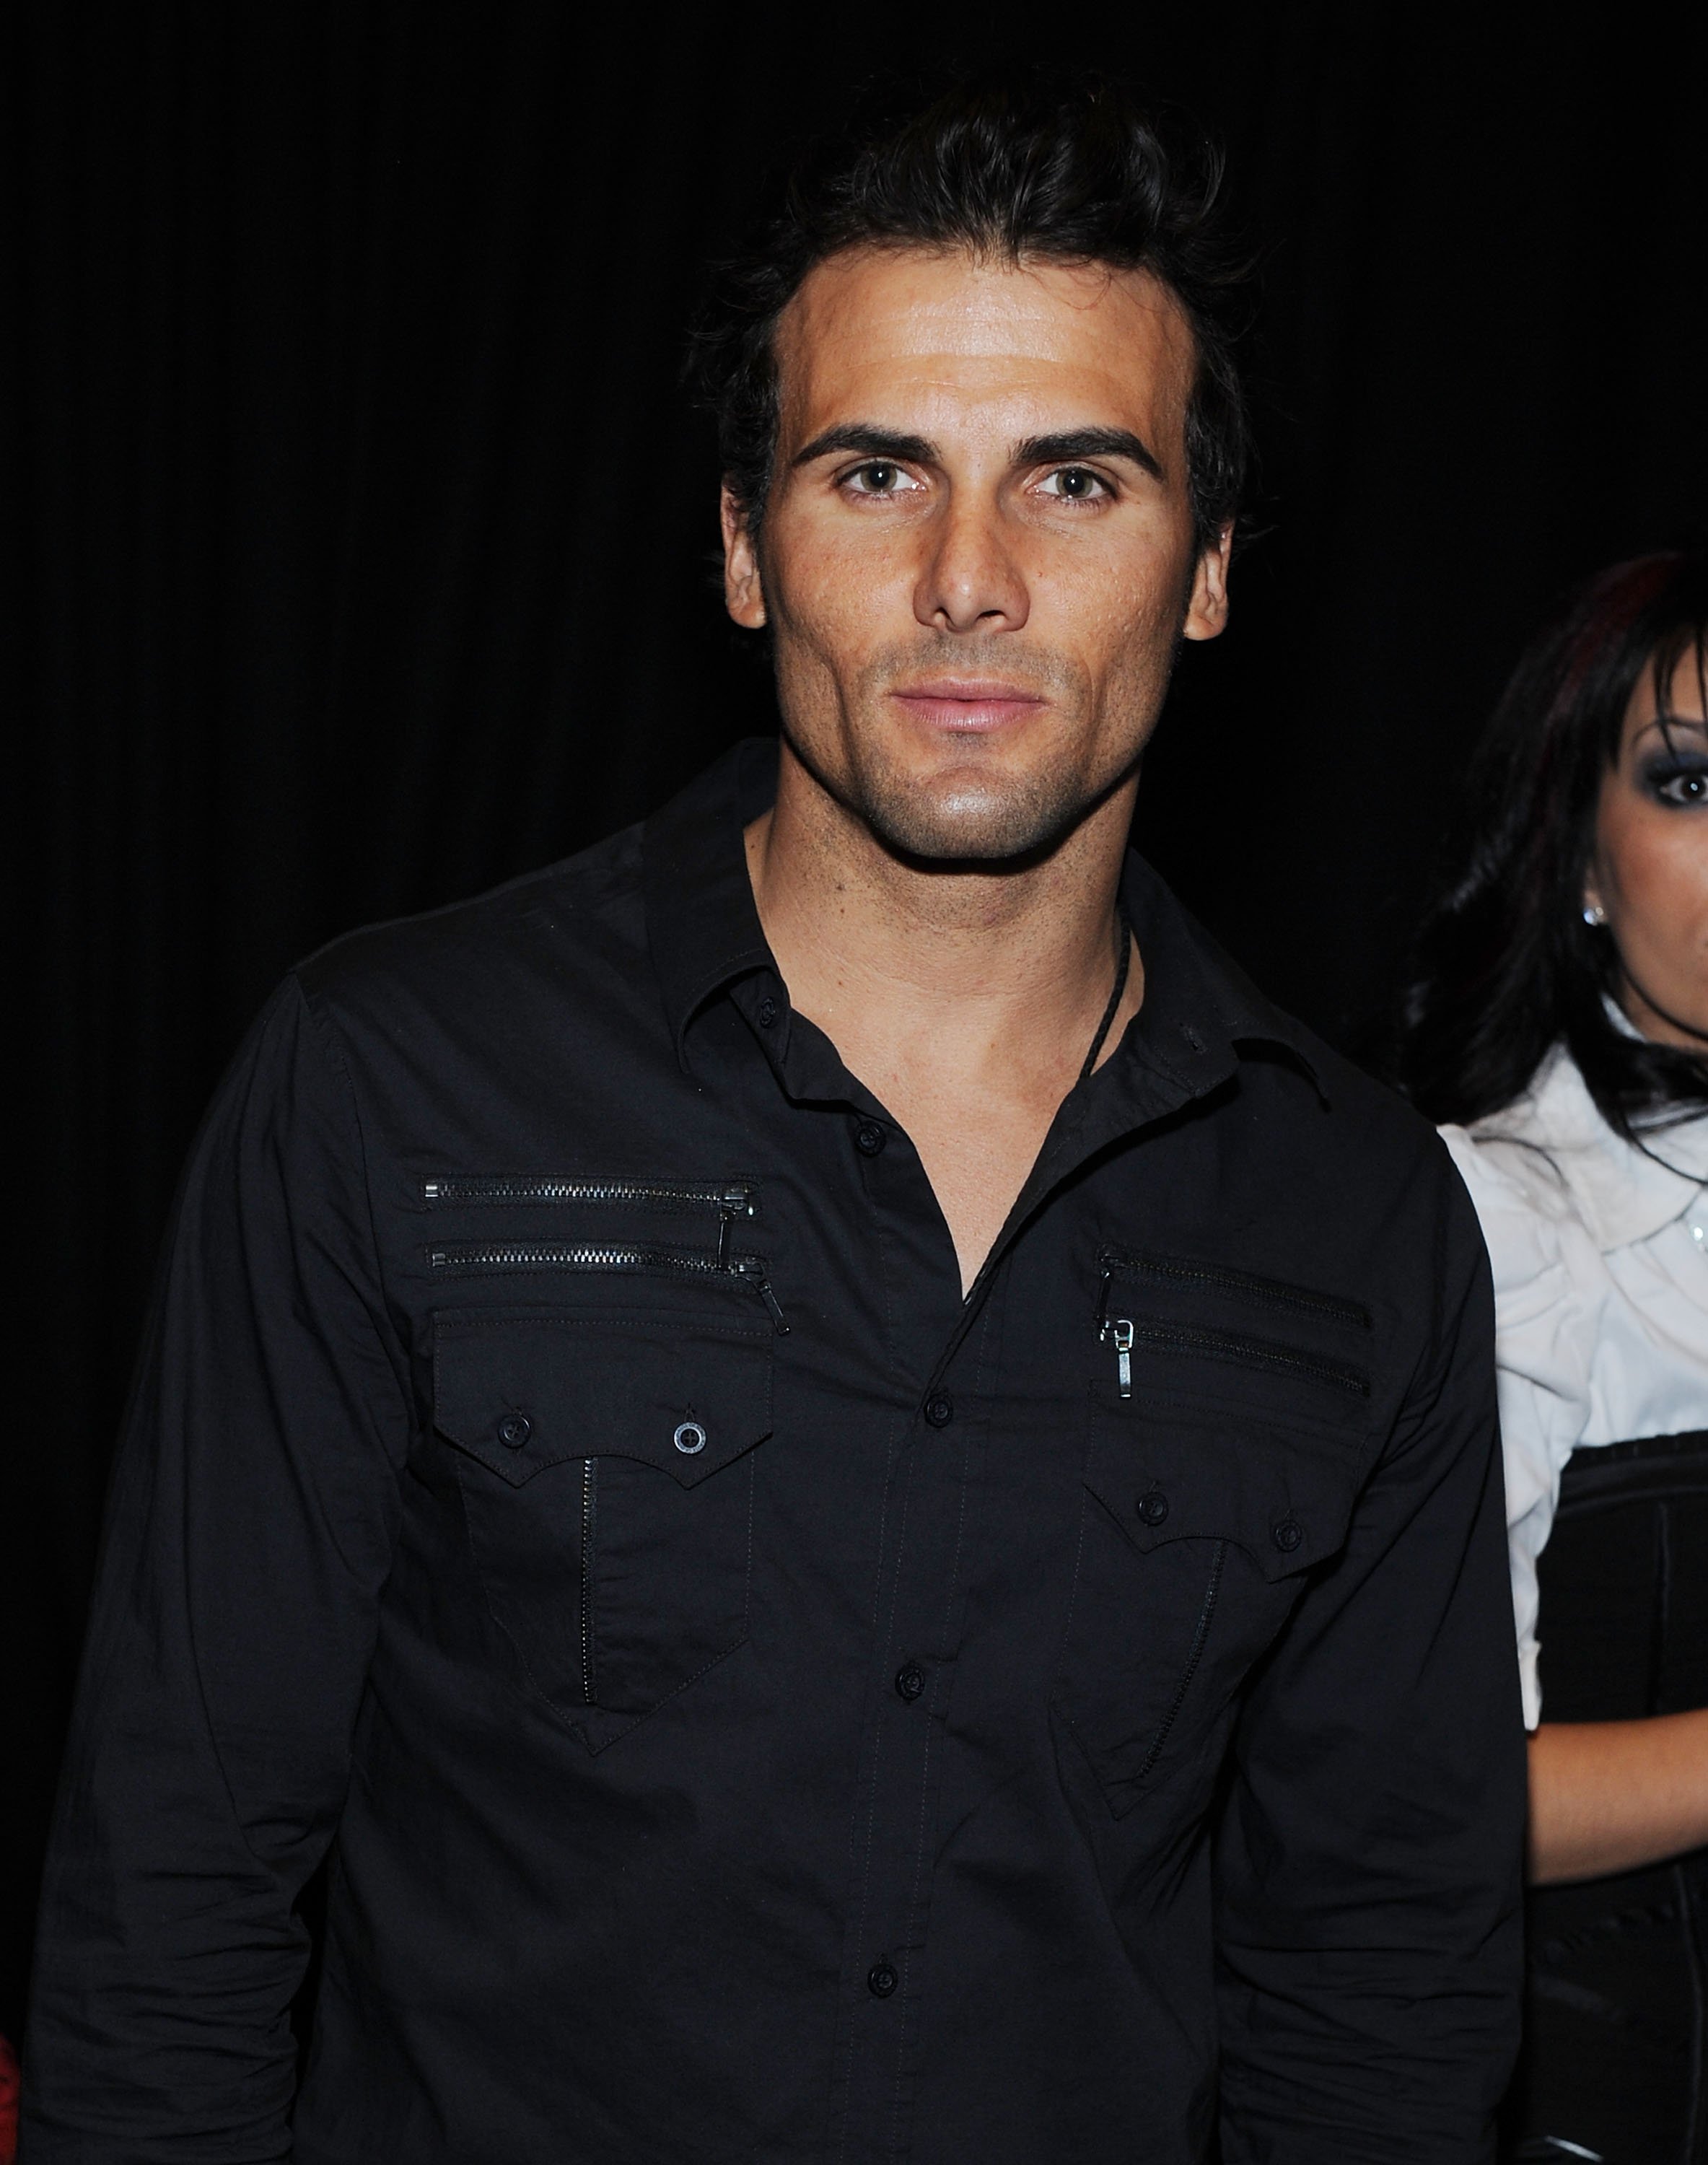 Jeremy Jackson attends the Gala Premiere of Criss Angel Believe by Cirque Du Soleil at the Luxor Hotel and Casino on October 31, 2008 in Las Vegas, Nevada. | Source: Getty Images